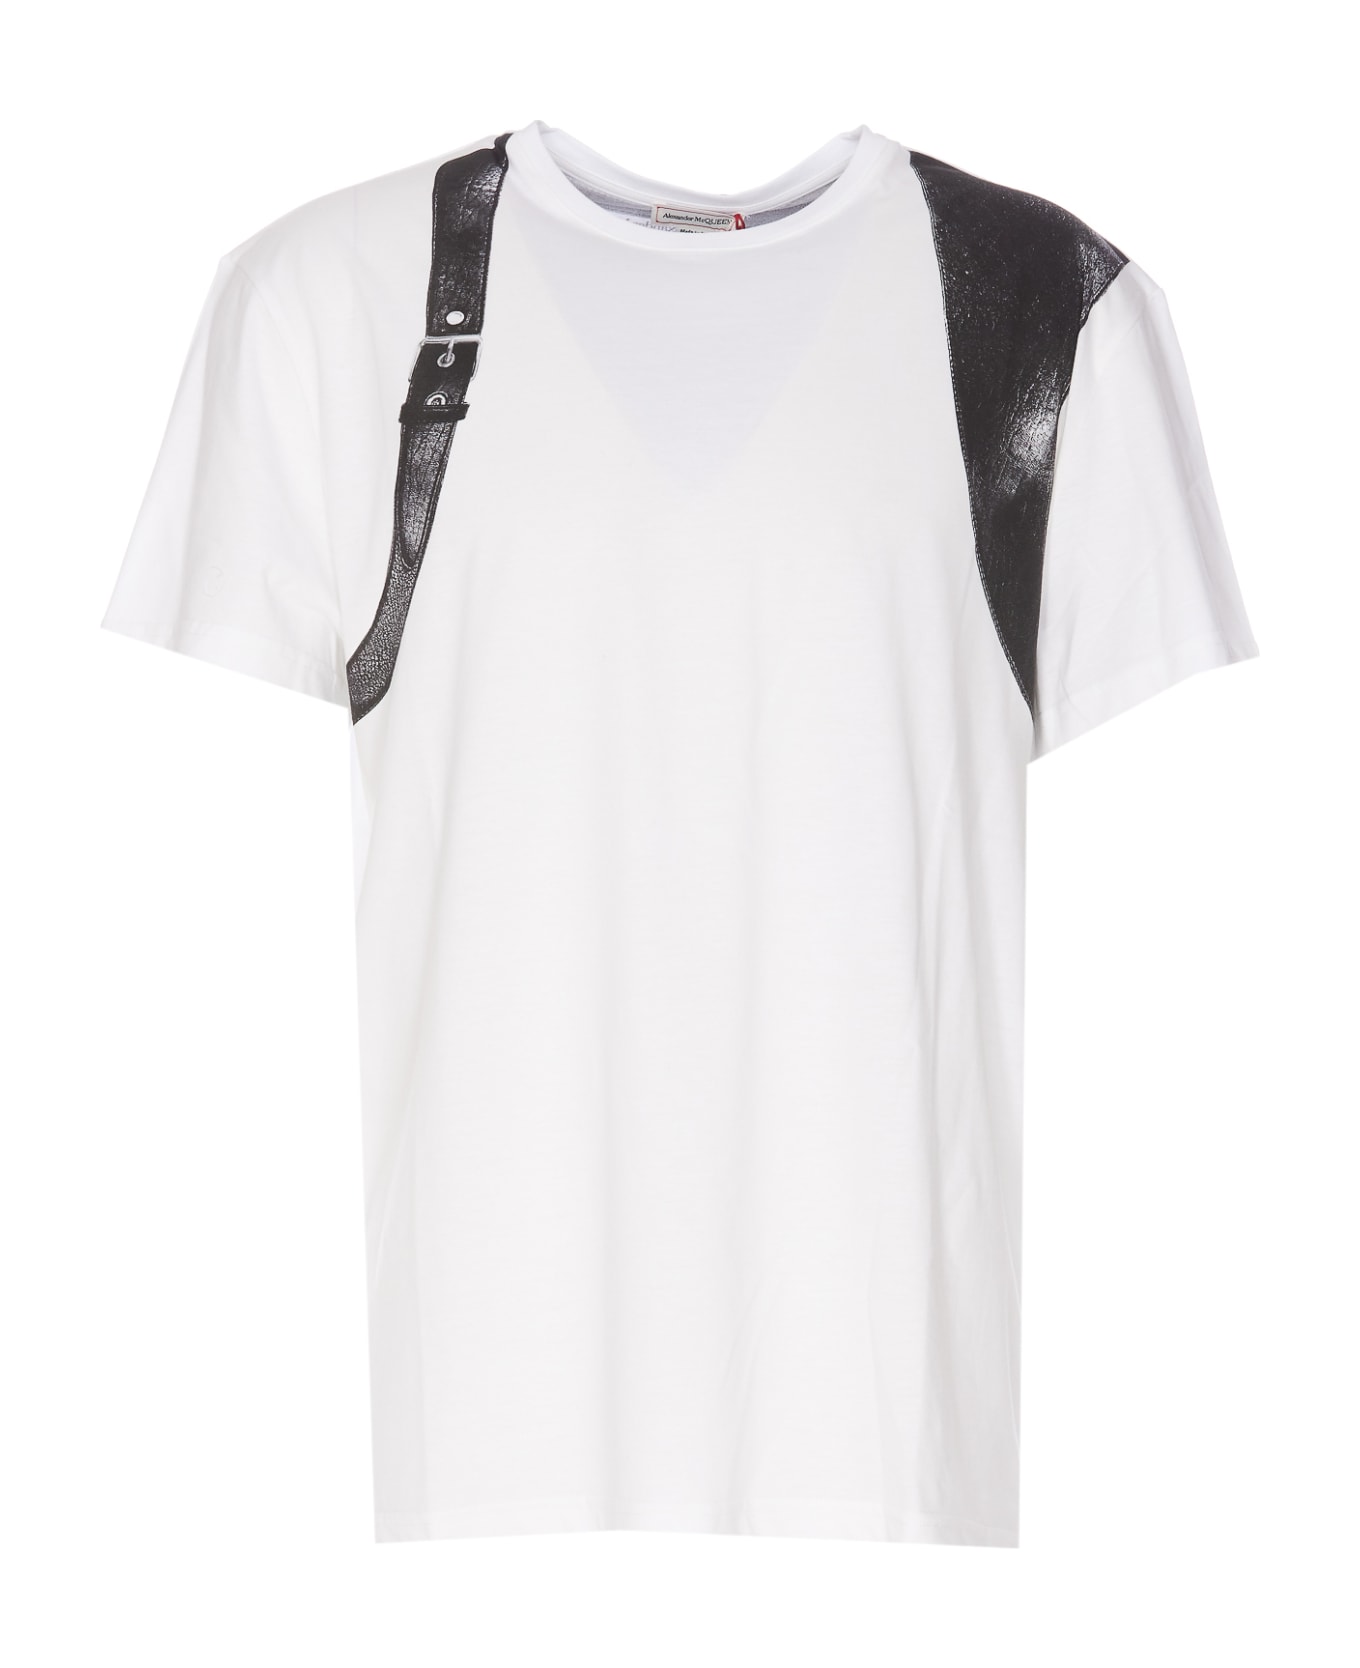 Alexander McQueen Harness T-shirt In White And Black - Bianco シャツ